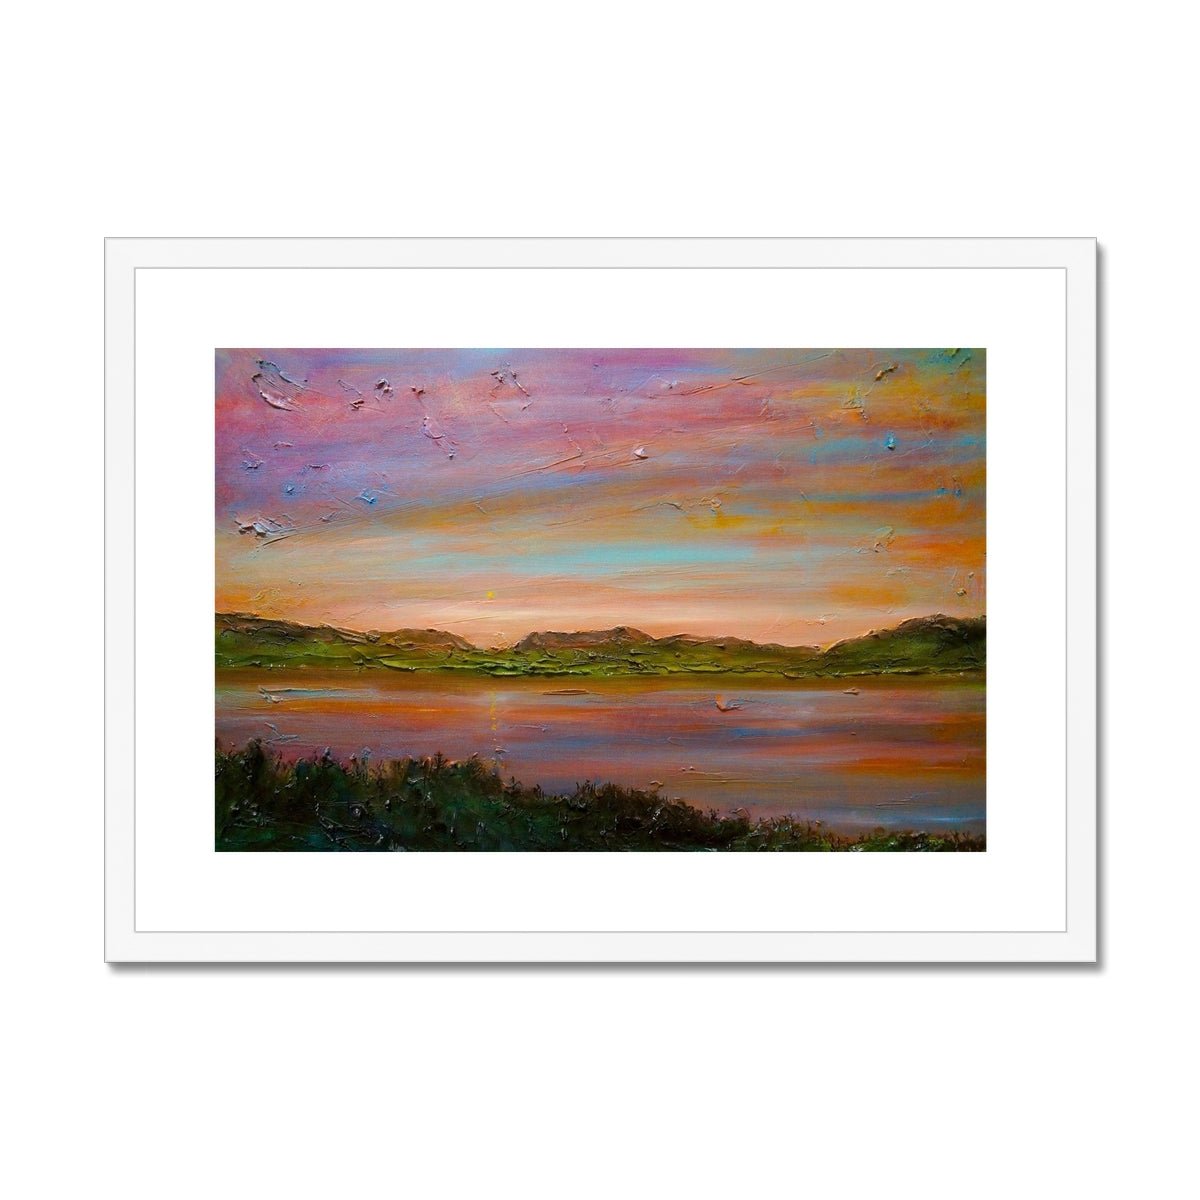 Gourock Golf Club Sunset Painting | Framed & Mounted Prints From Scotland-Framed & Mounted Prints-River Clyde Art Gallery-A2 Landscape-White Frame-Paintings, Prints, Homeware, Art Gifts From Scotland By Scottish Artist Kevin Hunter